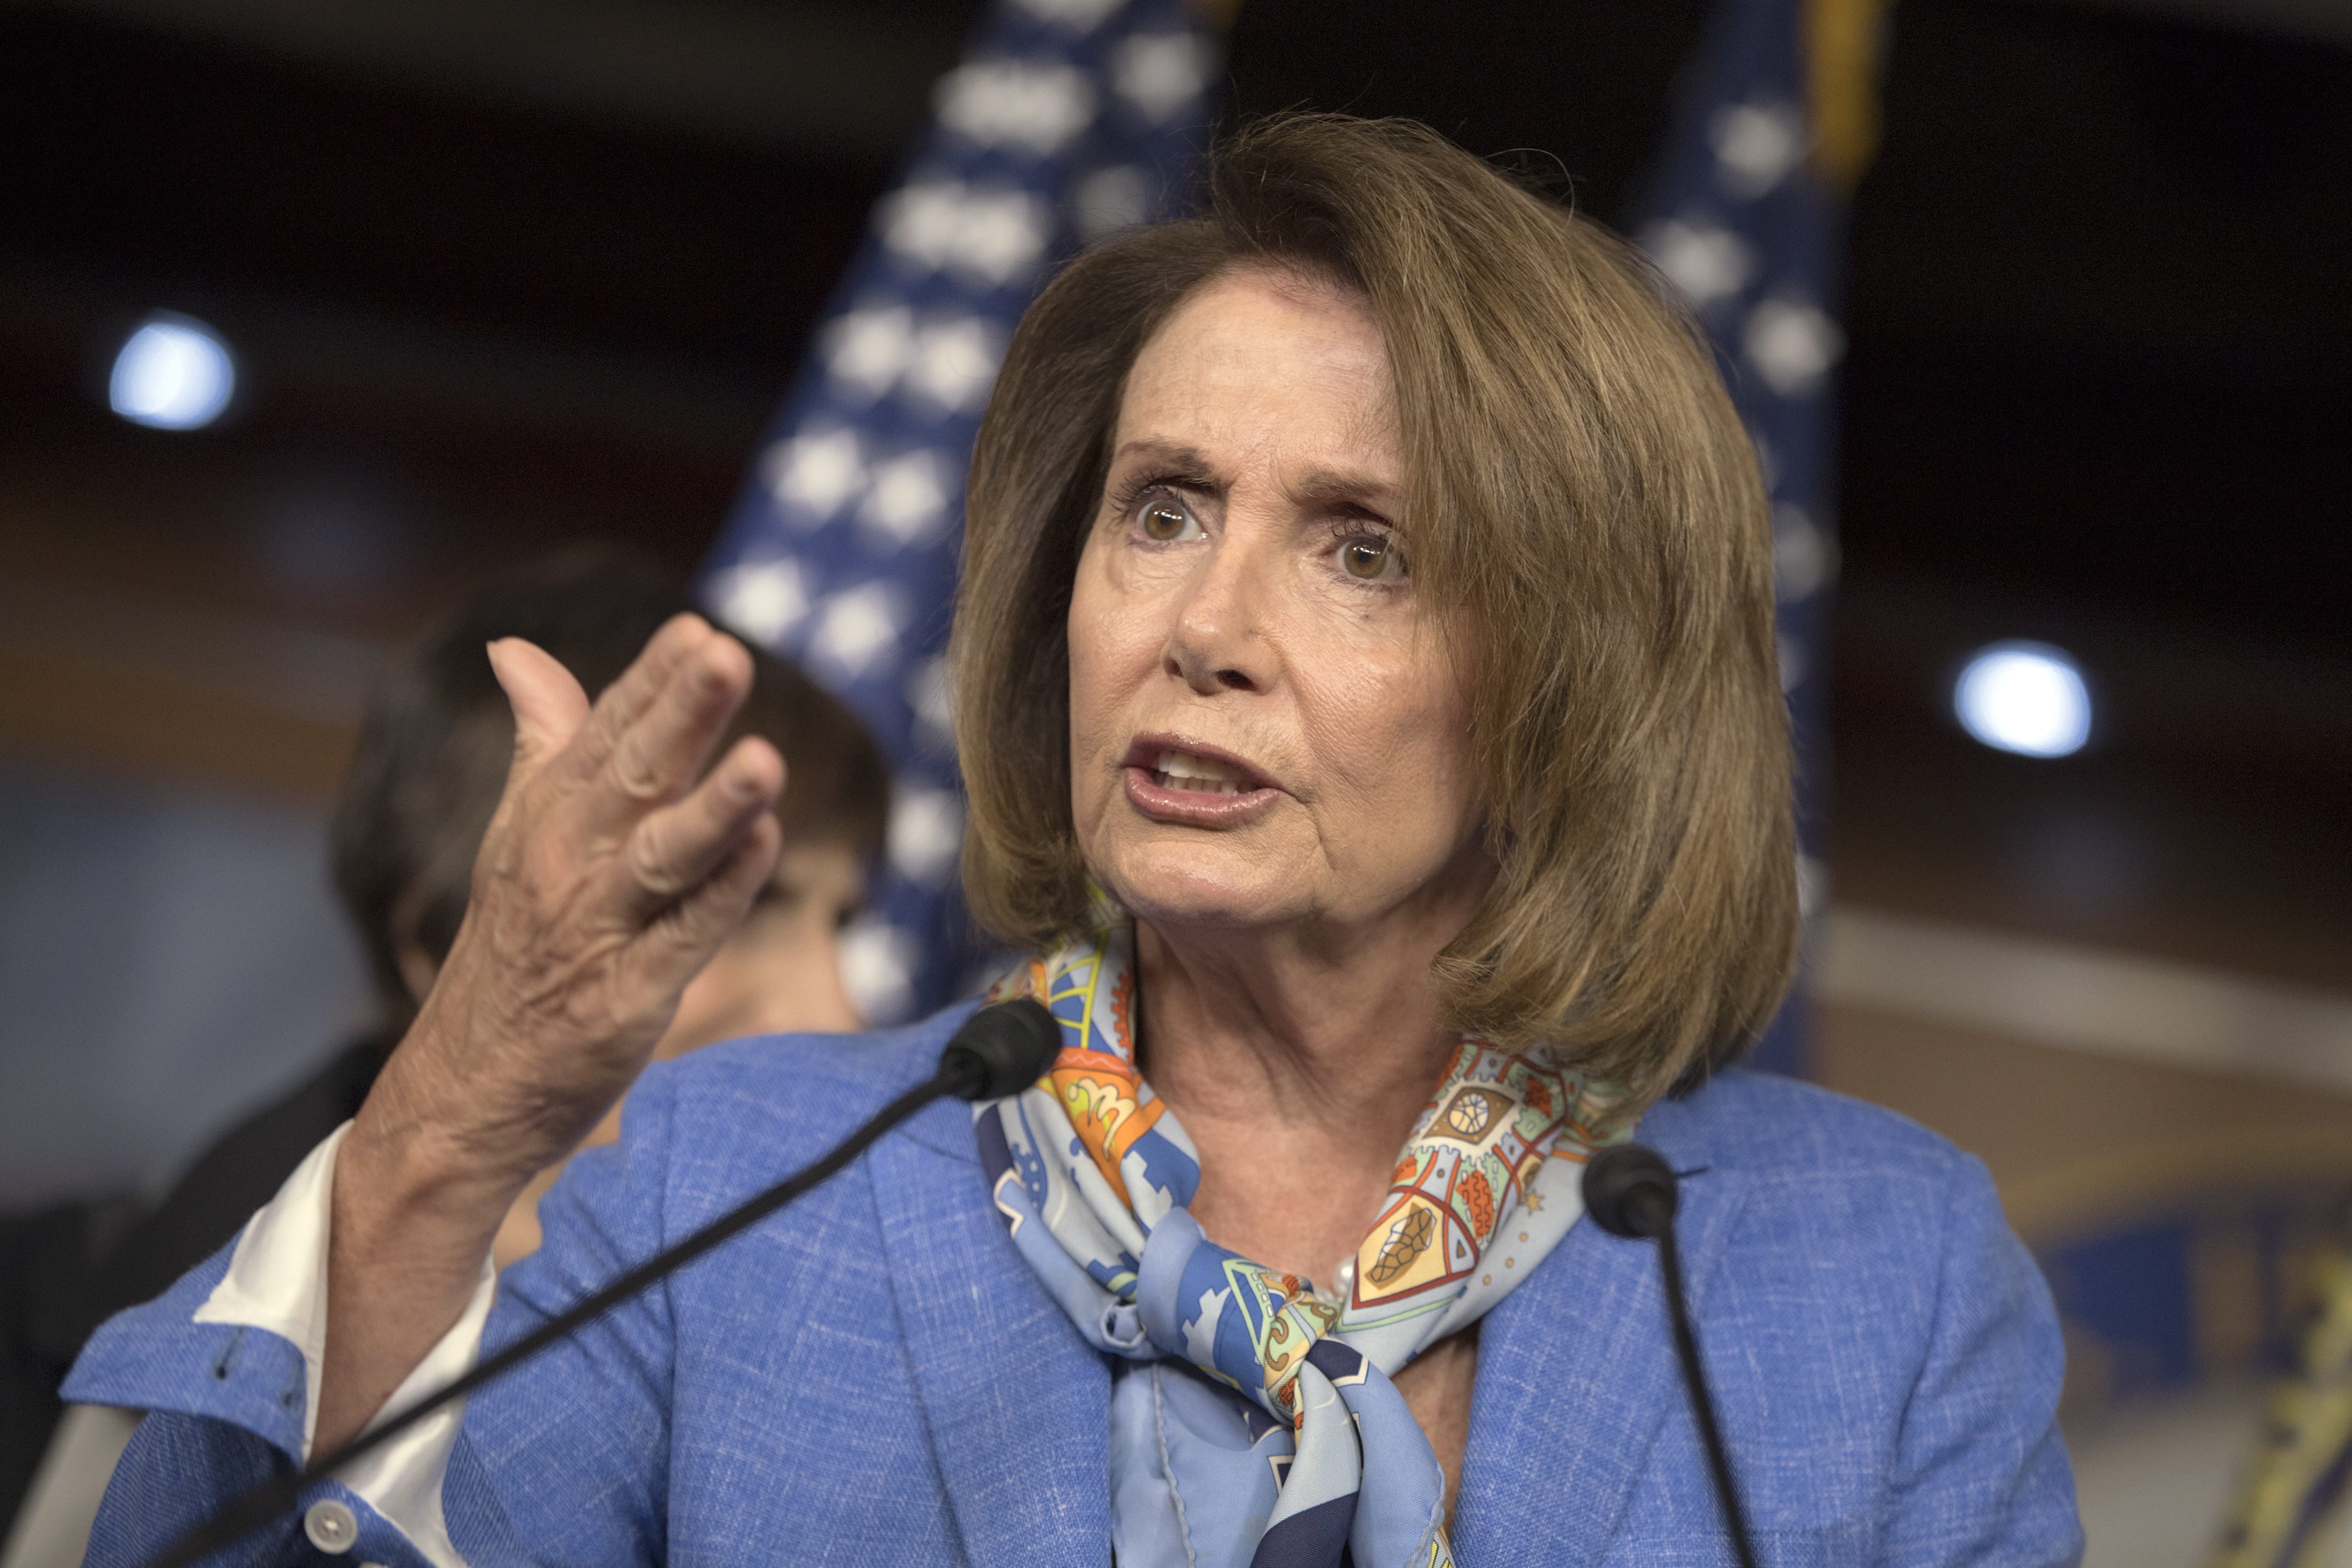 In this Aug. 11, 2016, photo, House Minority Leader Nancy Pelosi, D-Calif., speaks at a news conference on Capitol Hill in Washington. Pelosi is advising fellow Democrats to change their cellphone numbers and not let family members read their text messages after personal and official information of Democratic House members and congressional staff was posted online. Pelosi says in a letter to Democrats that the Democratic Congressional Campaign Committee has hired a cybersecurity firm to investigate the hacking of the committee's computers. (AP Photo/J.